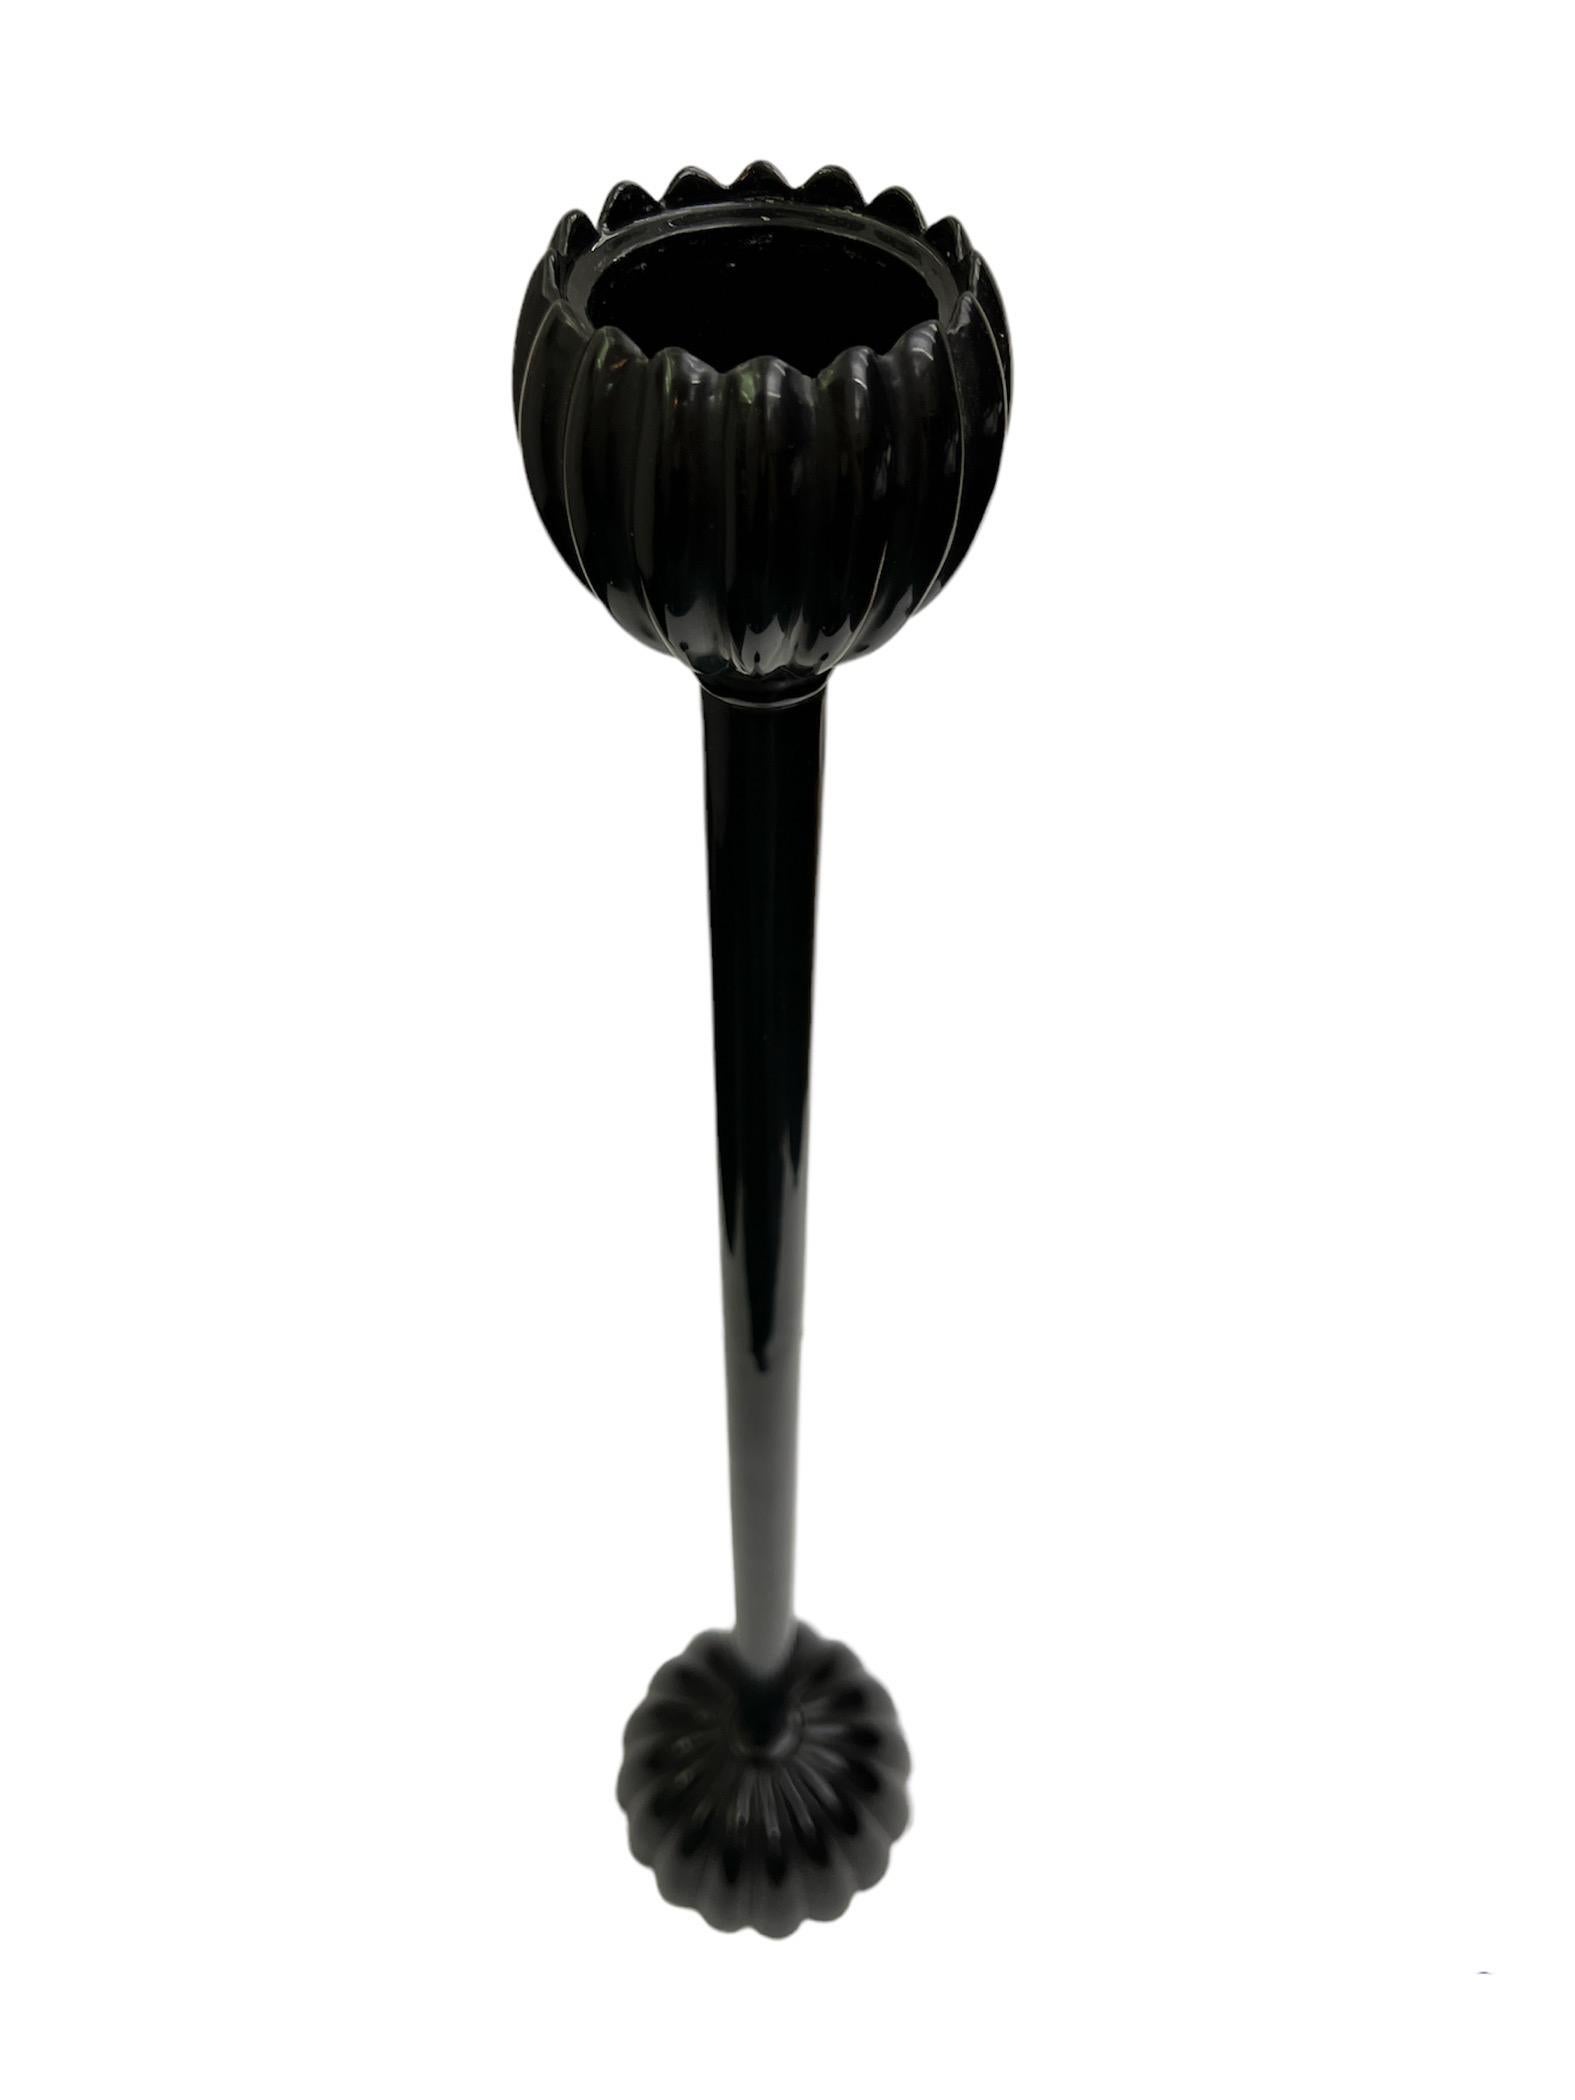 Black Tulip Form Candlesticks in Japanese Style In Good Condition For Sale In New York, NY